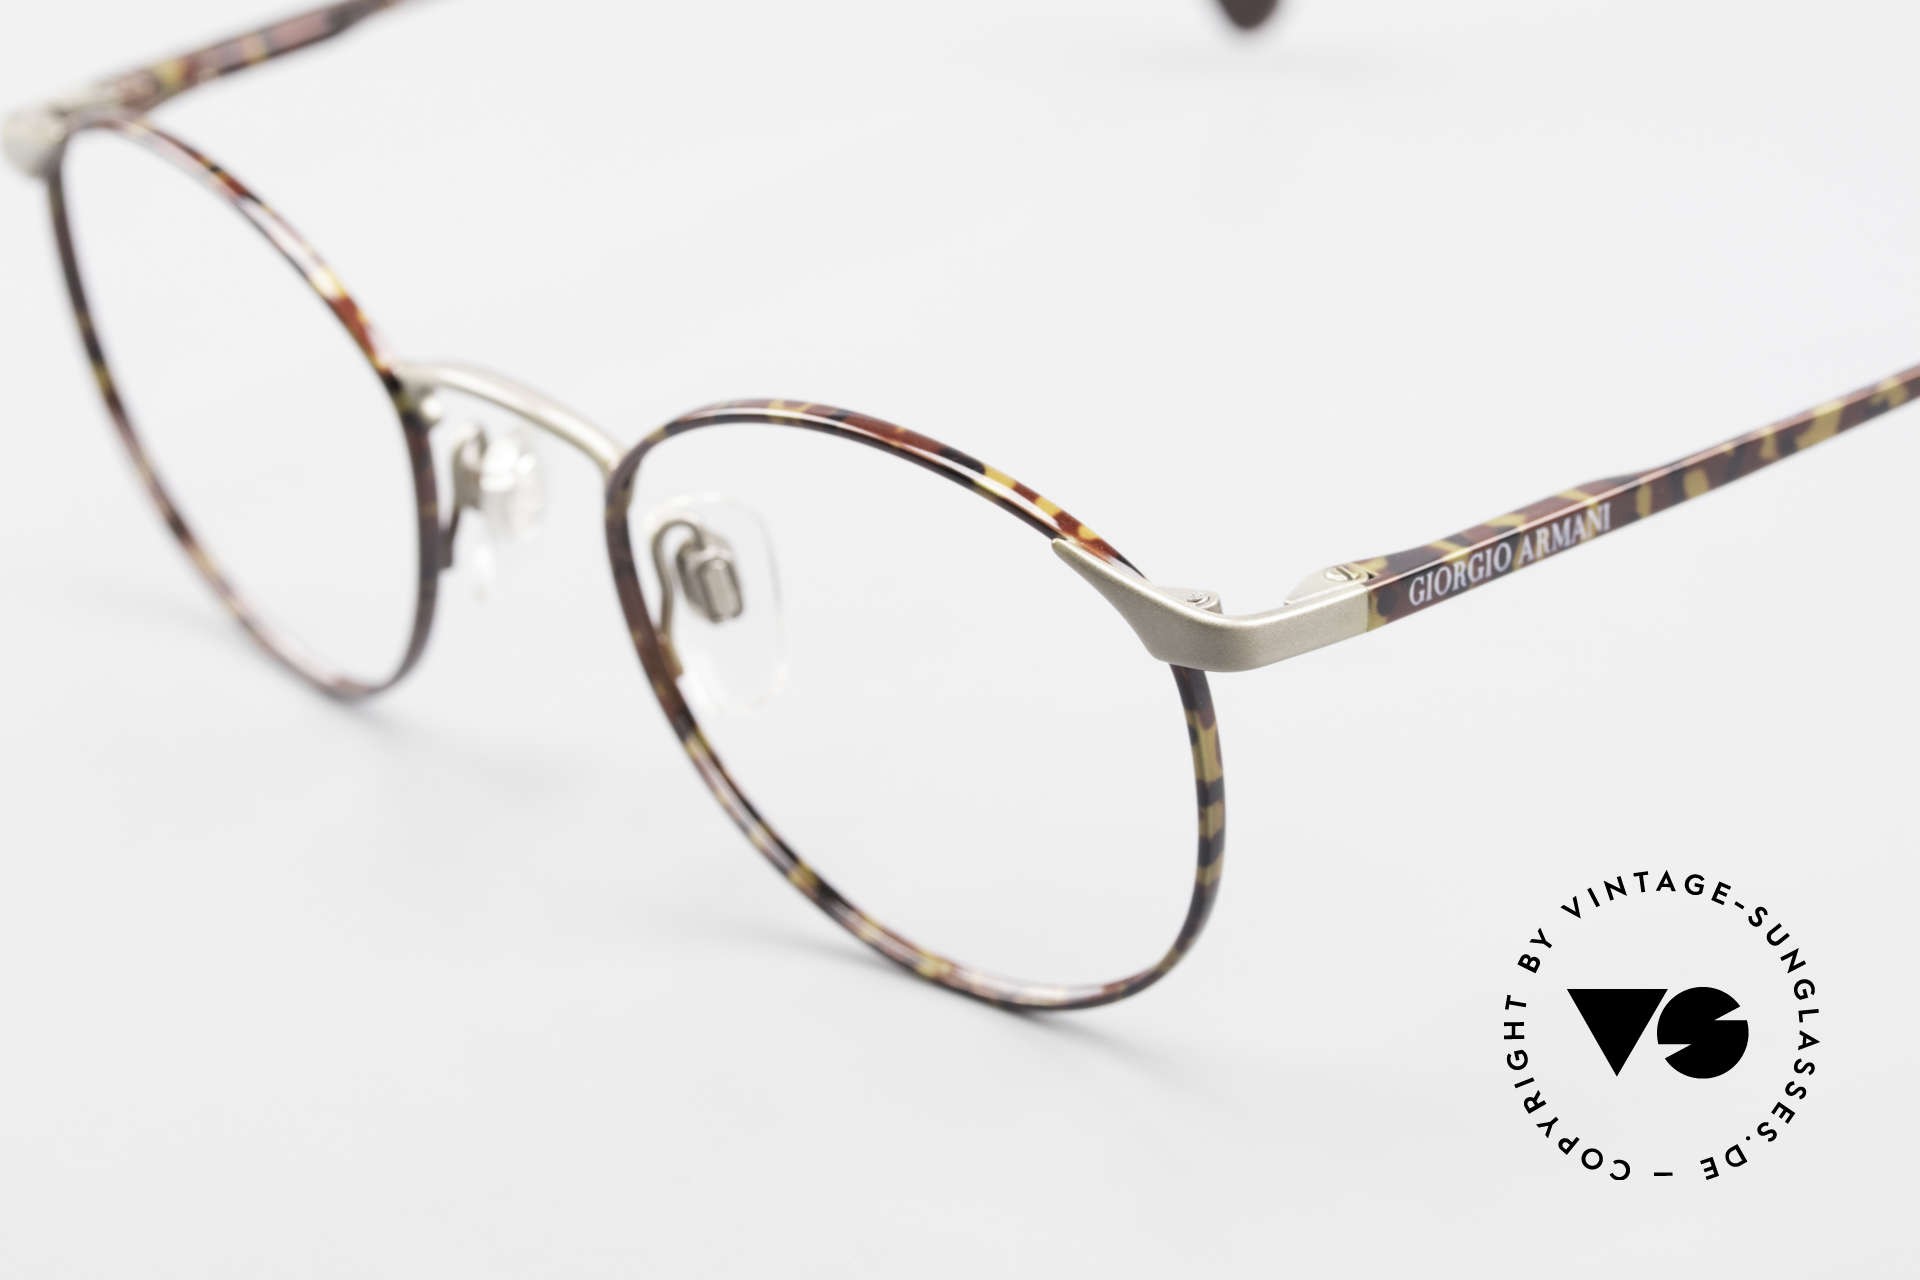 Giorgio Armani 163 Small Panto Eyeglass-Frame, can be glazed with lenses of any kind (optical / sun), Made for Men and Women